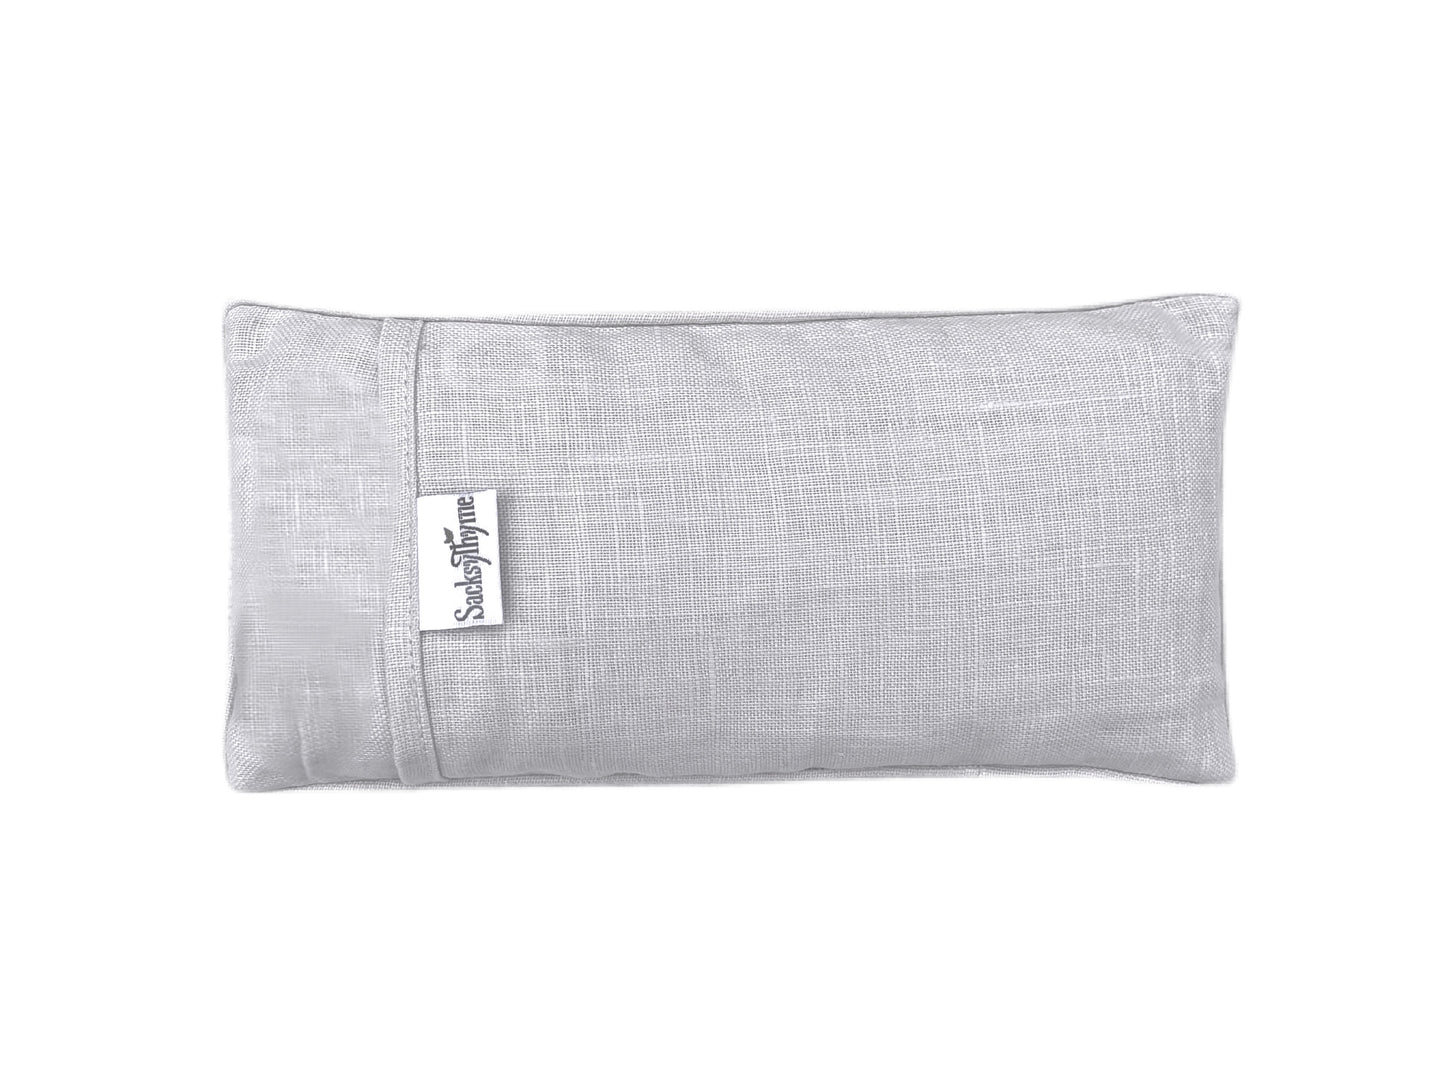 eye pillow relaxation lavender yoga mask weighted gifts meditation aromatherapy relaxing lavendar calming naturals soothing cover hot cold heated heating pad microwavable cooling warm compress therapy linaza sinuses herb care aroma migrane flaxseed